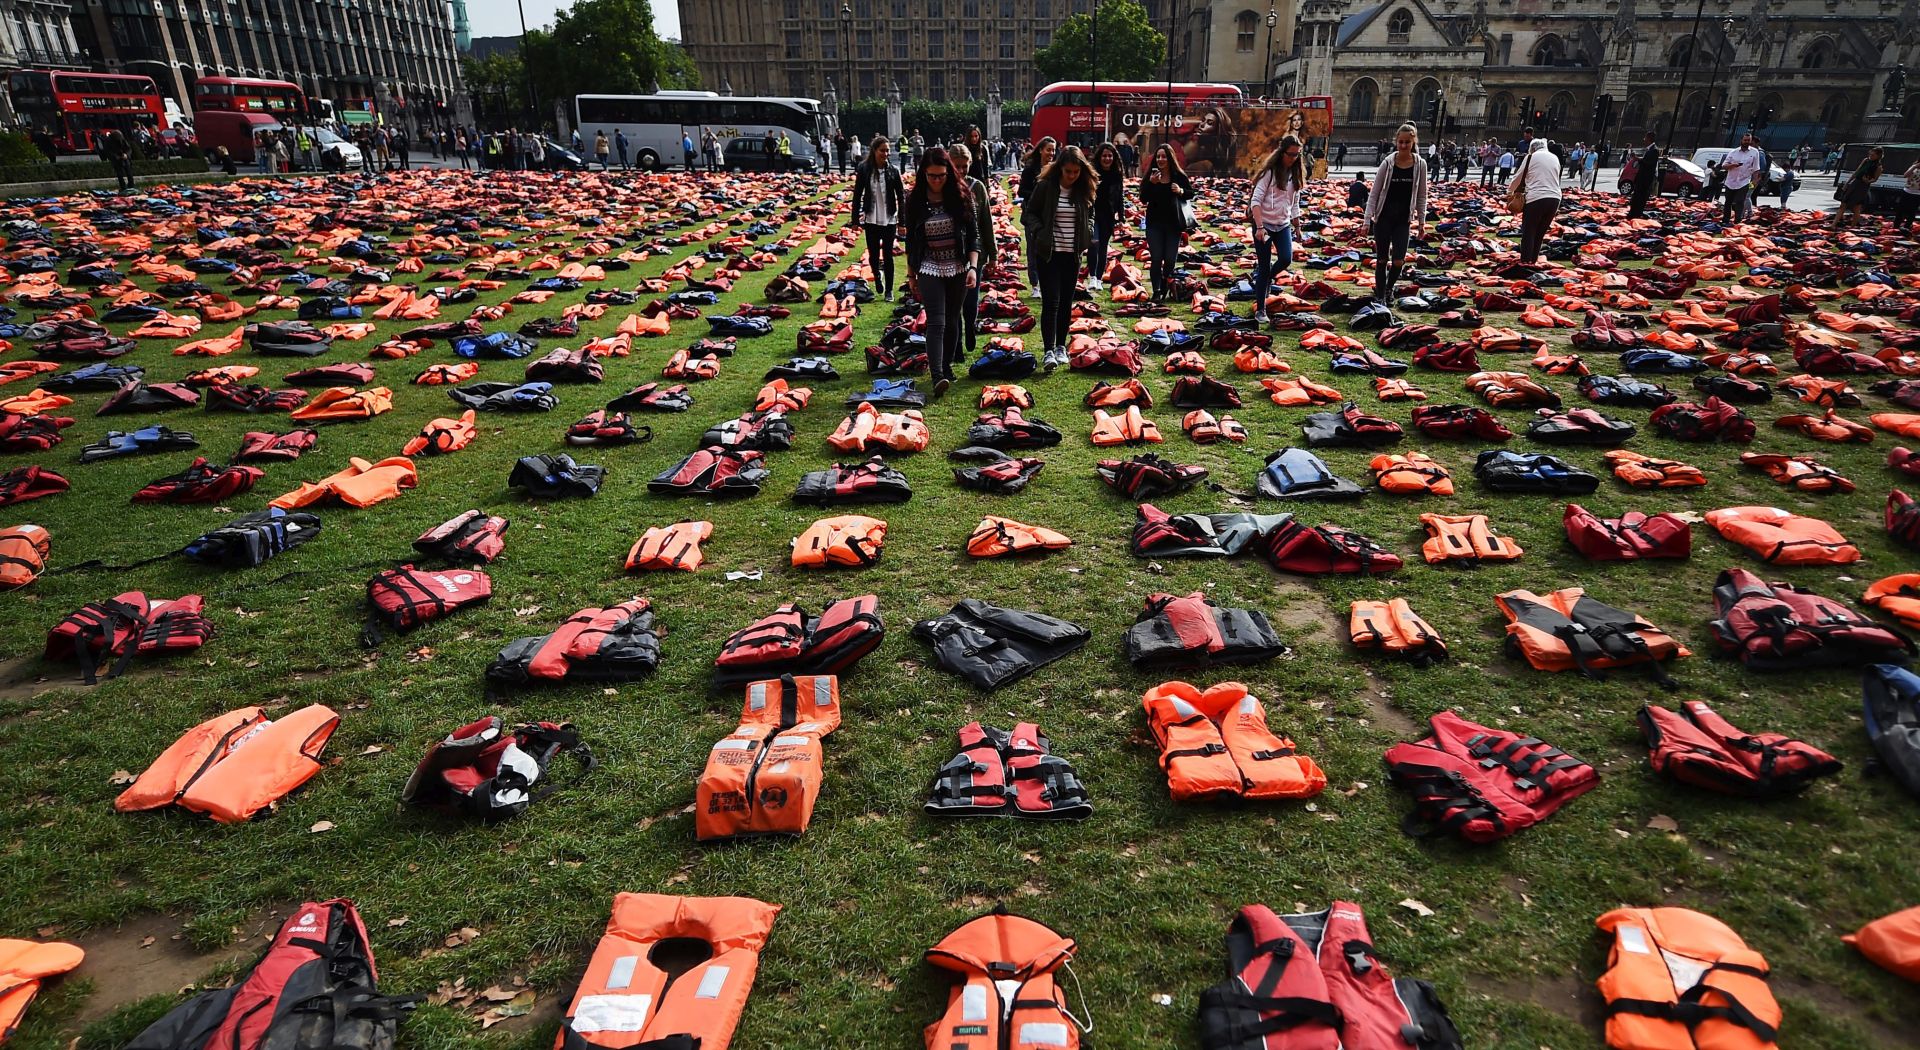 epa05547646 Life jackets worn by fleeing refugees lie in Parliament Square in London, Britain, 19 September. Thousands of life-jackets were laid out in Parliament Square to highlight the need to protect refugees and migrants. The jackets serve as a visual reminder of the suffering and risks hundreds of thousands of refugees have endured. World leaders are meeting at the United Nations Migration summit in New York these days.  EPA/ANDY RAIN